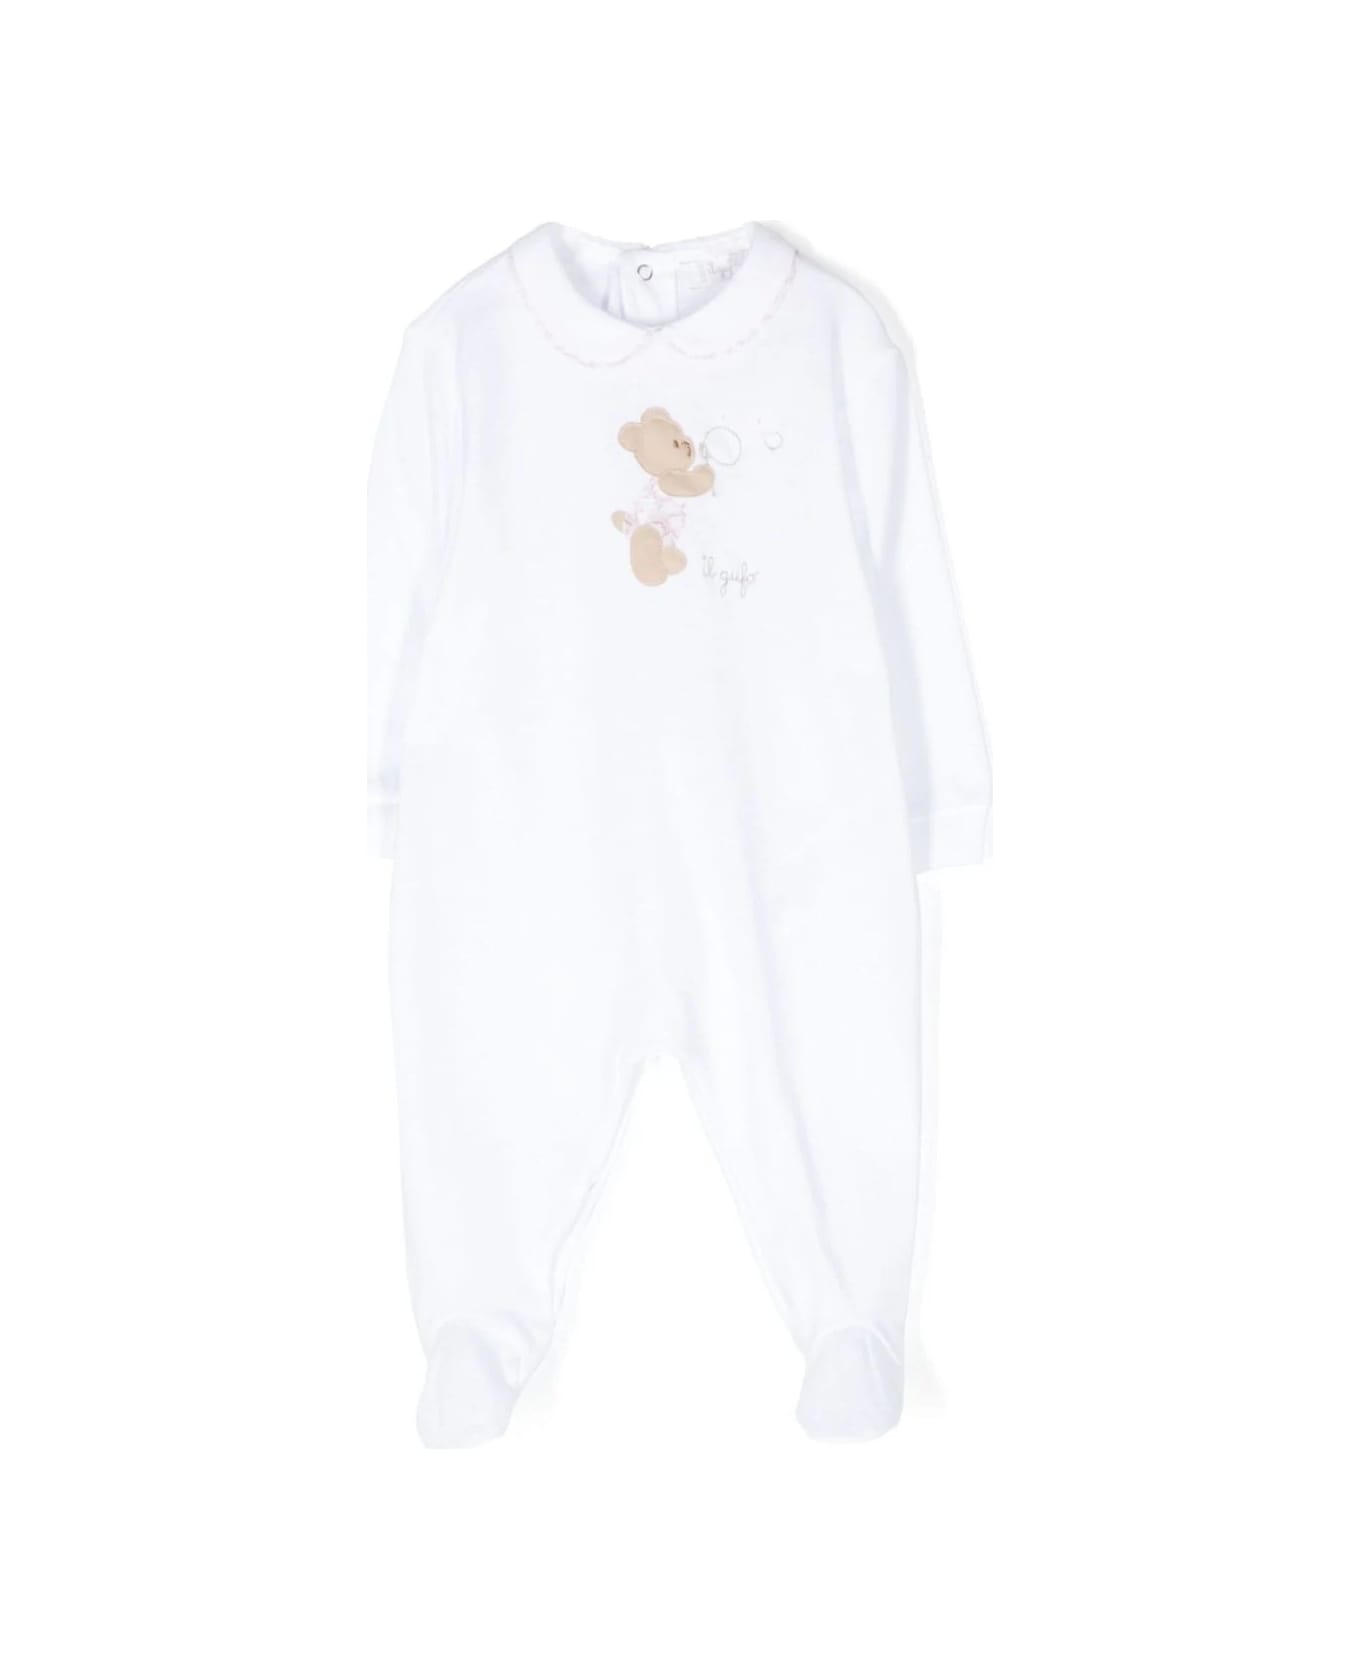 Il Gufo White Playsuit With Feet And Teddy-bear Embellishment - Pink